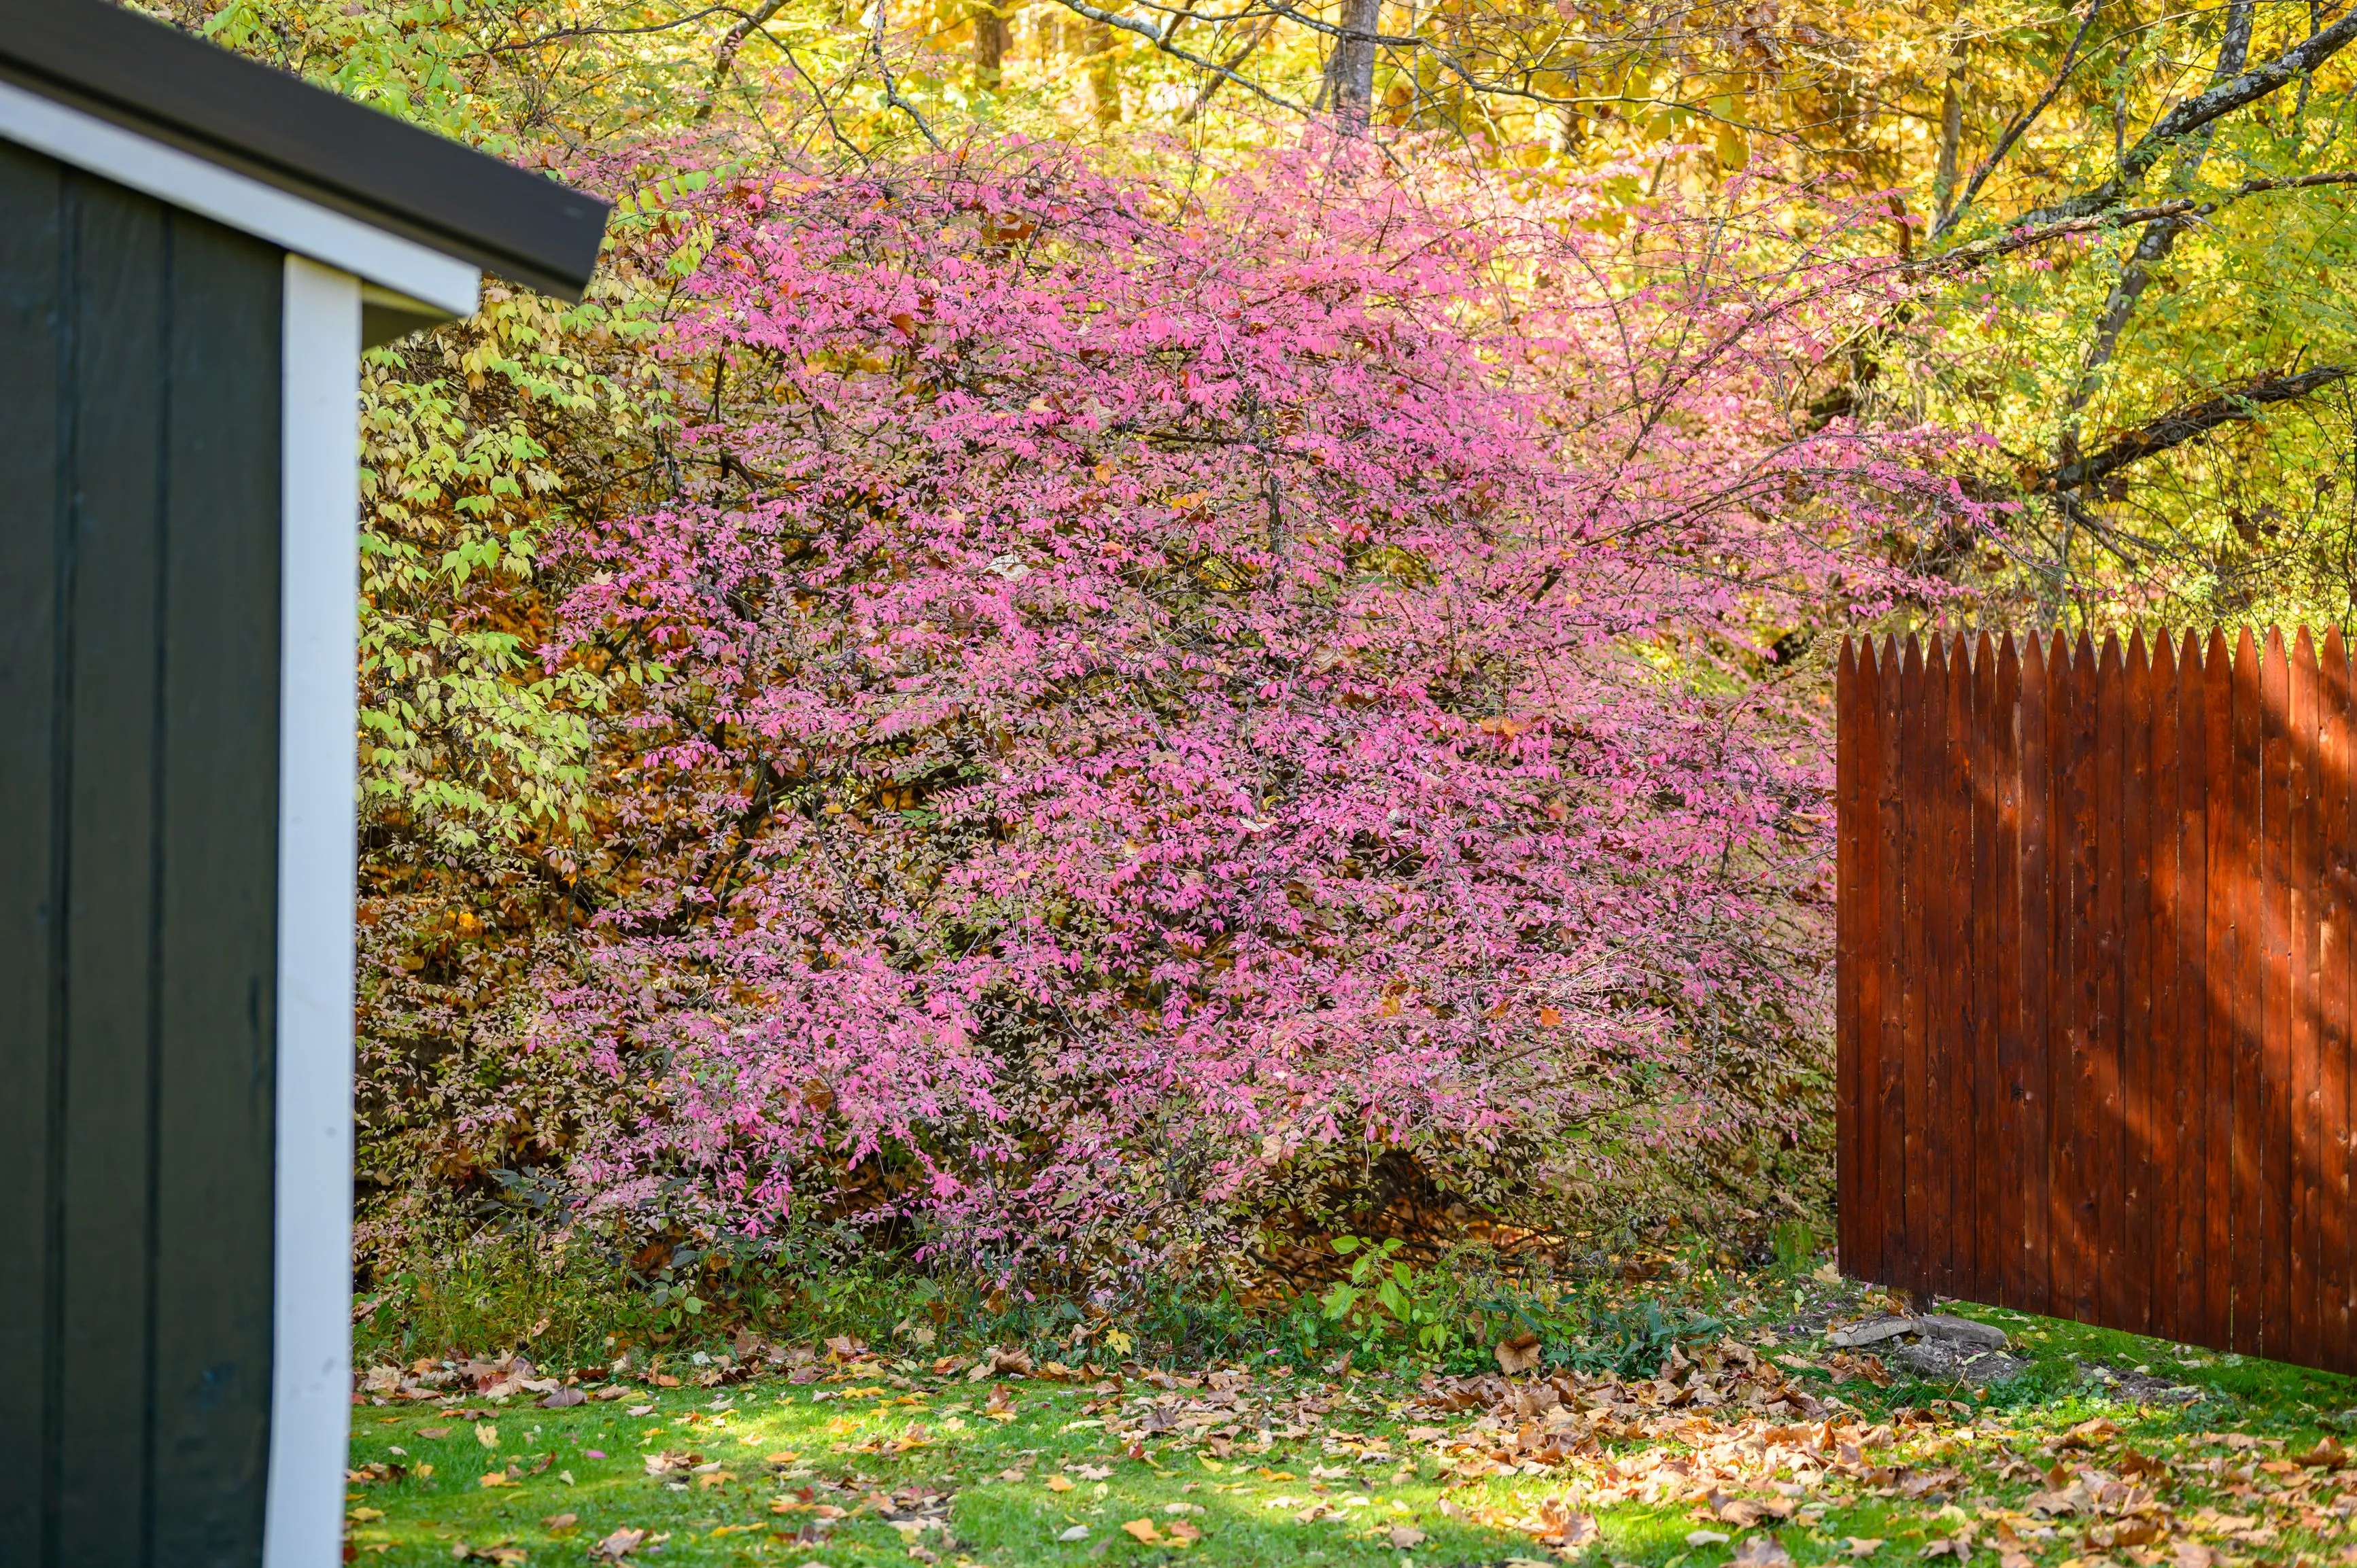 Colorful autumn backyard with a pink-flowering tree, fallen leaves, a wooden fence, and a portion of a building's corner.